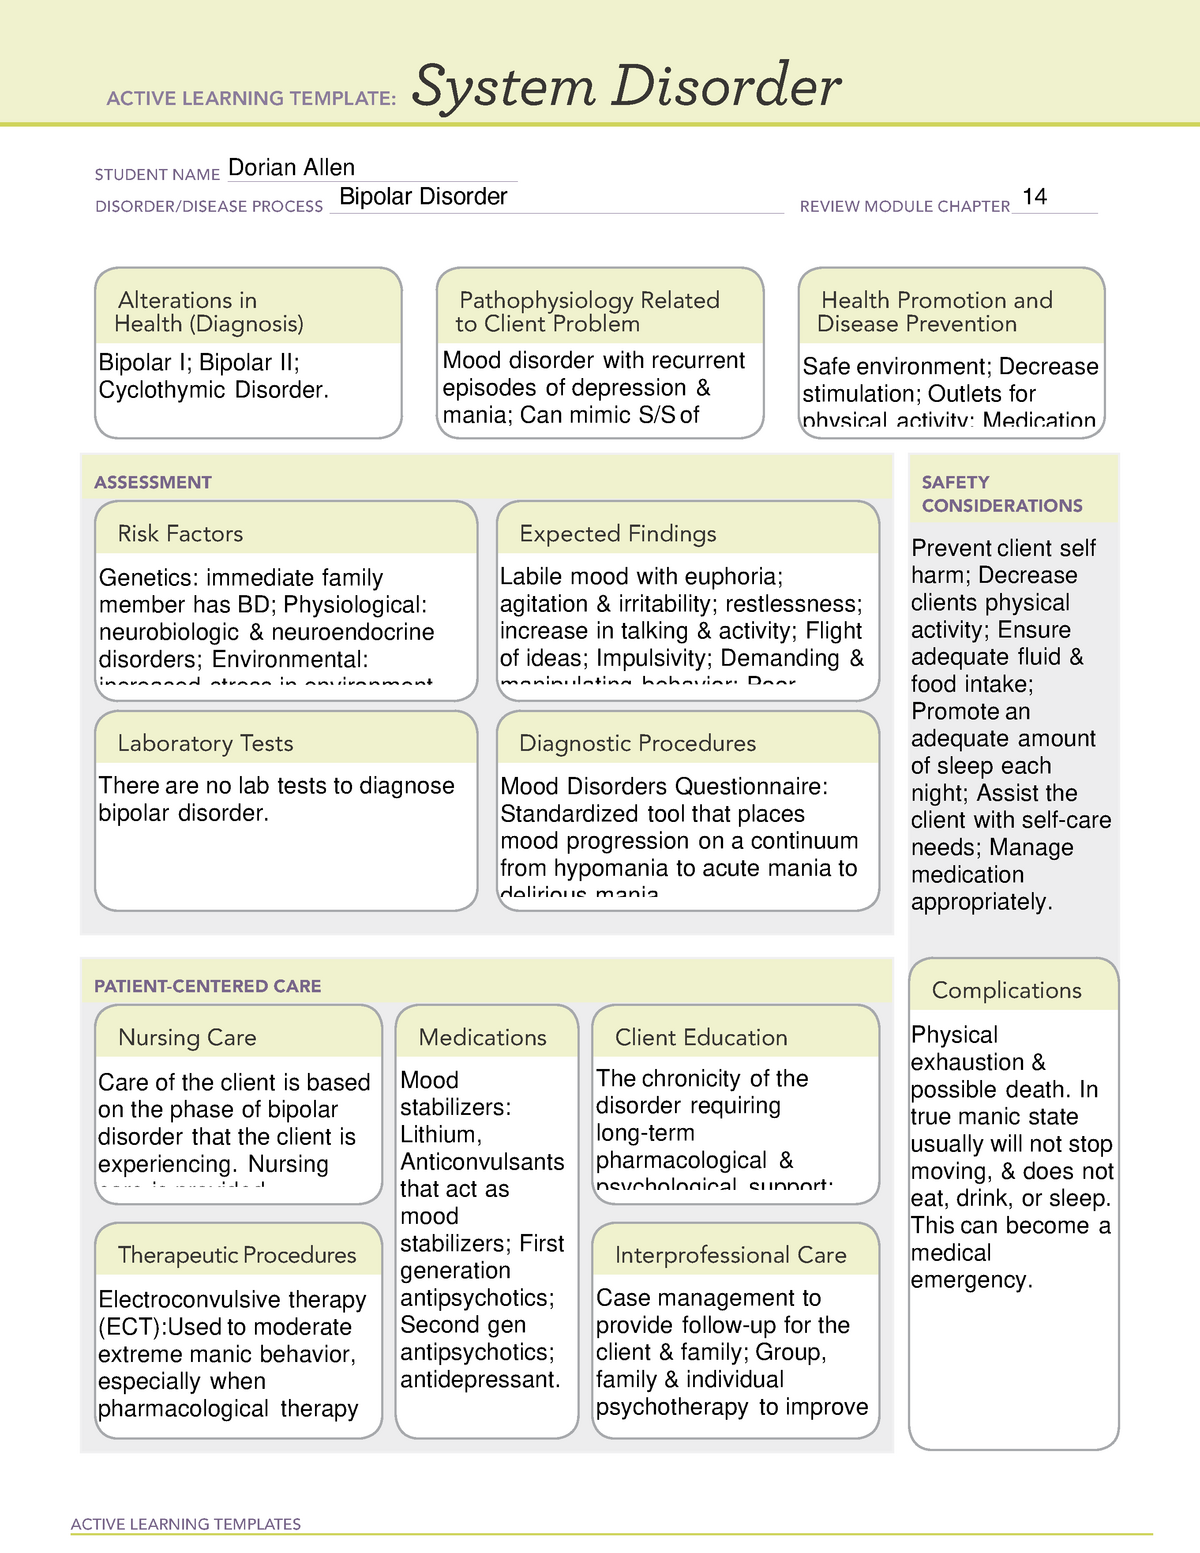 Ati System Disorder Template Bipolar Docx Active Learning Template